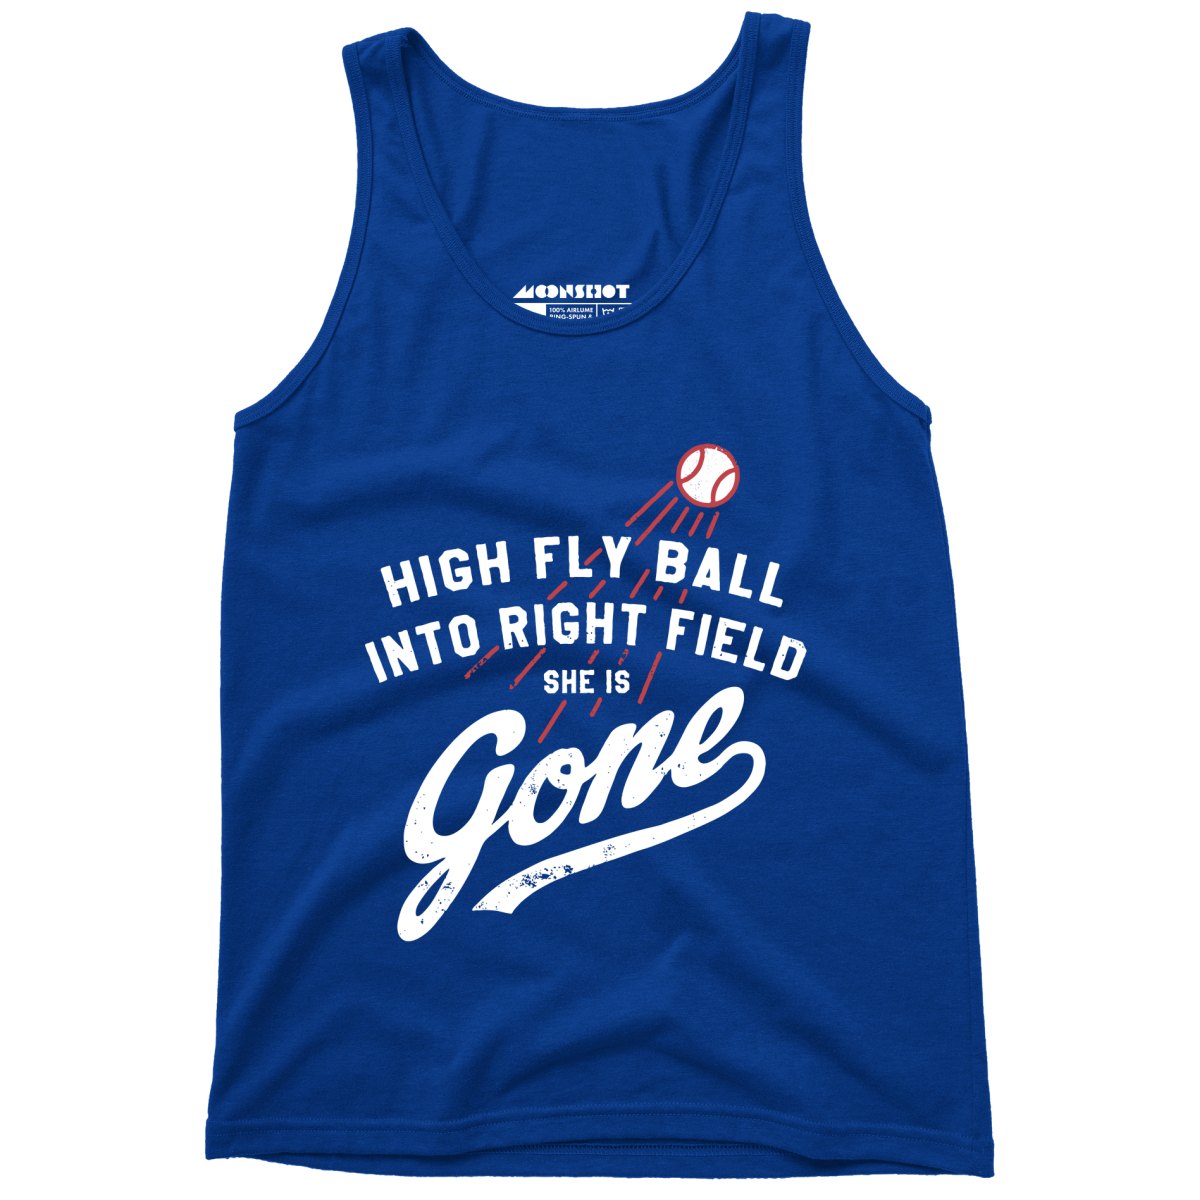 High Fly Ball Into Right Field She is Gone - Unisex Tank Top